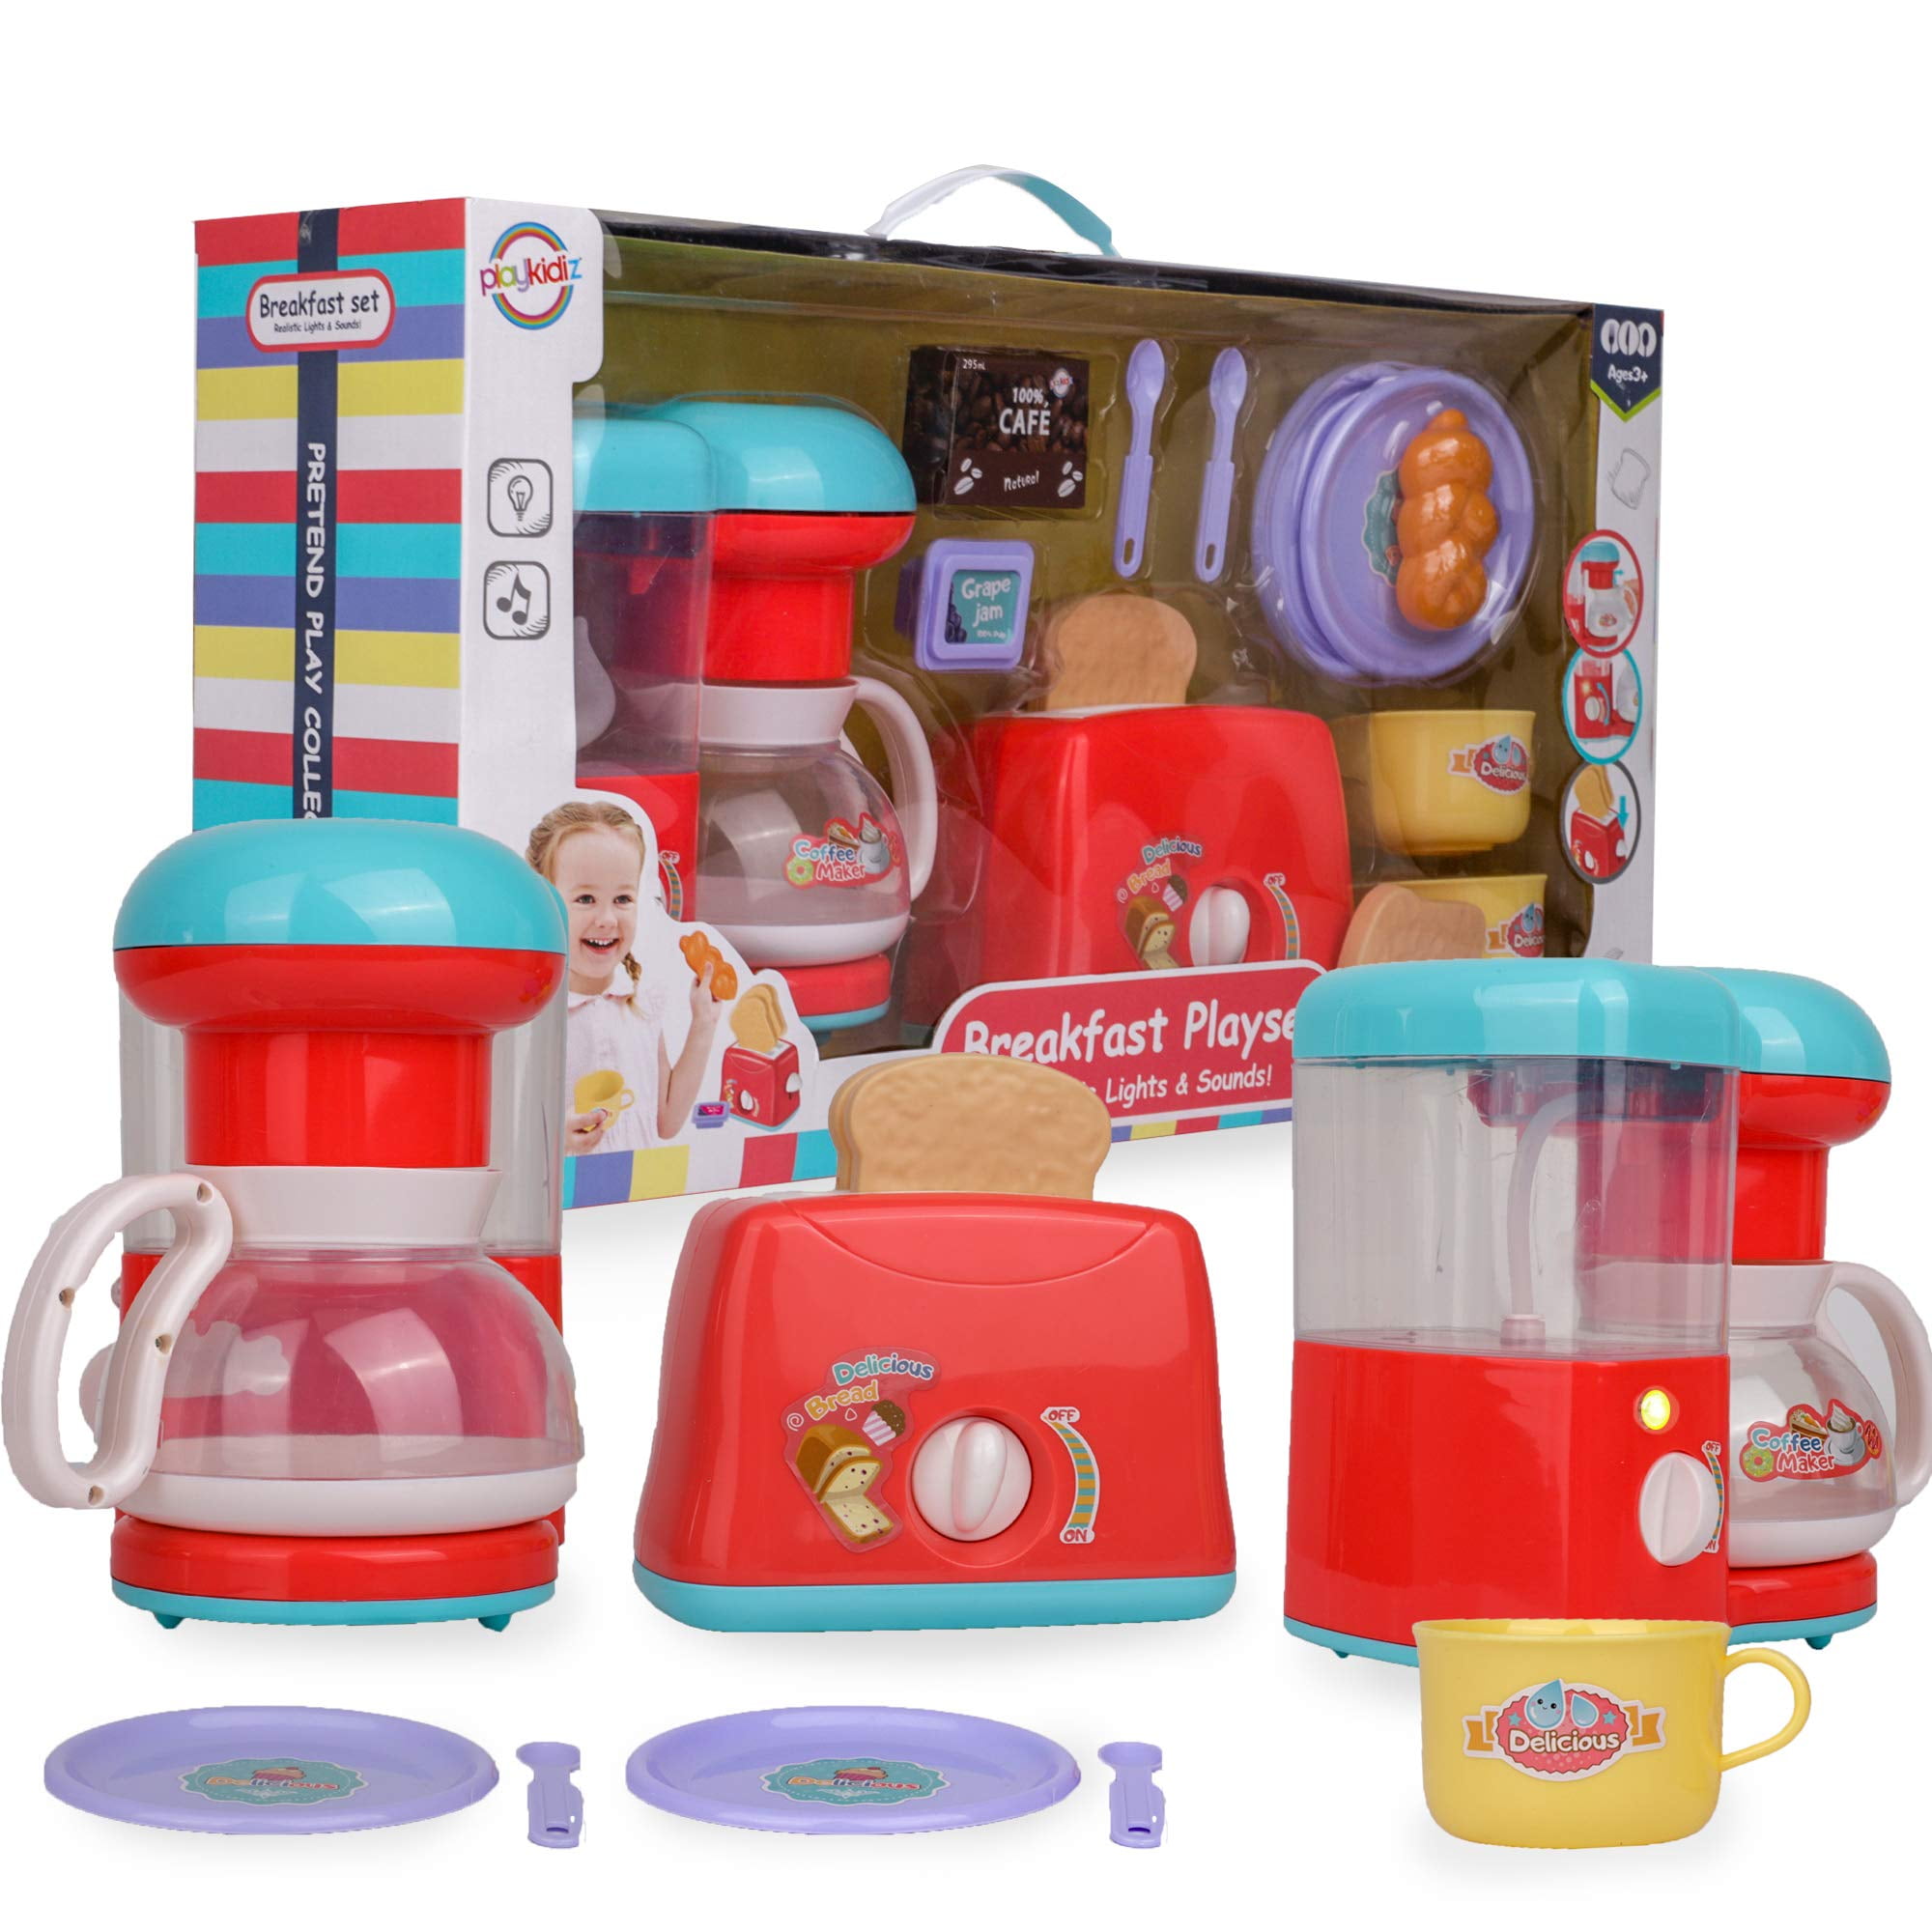 Toy Kitchen Appliances for Kids with Play Food, Workable Toy Coffee Maker &  Toy Toaster Playset for Kids Toddlers, Pretend Play Toy Kitchen